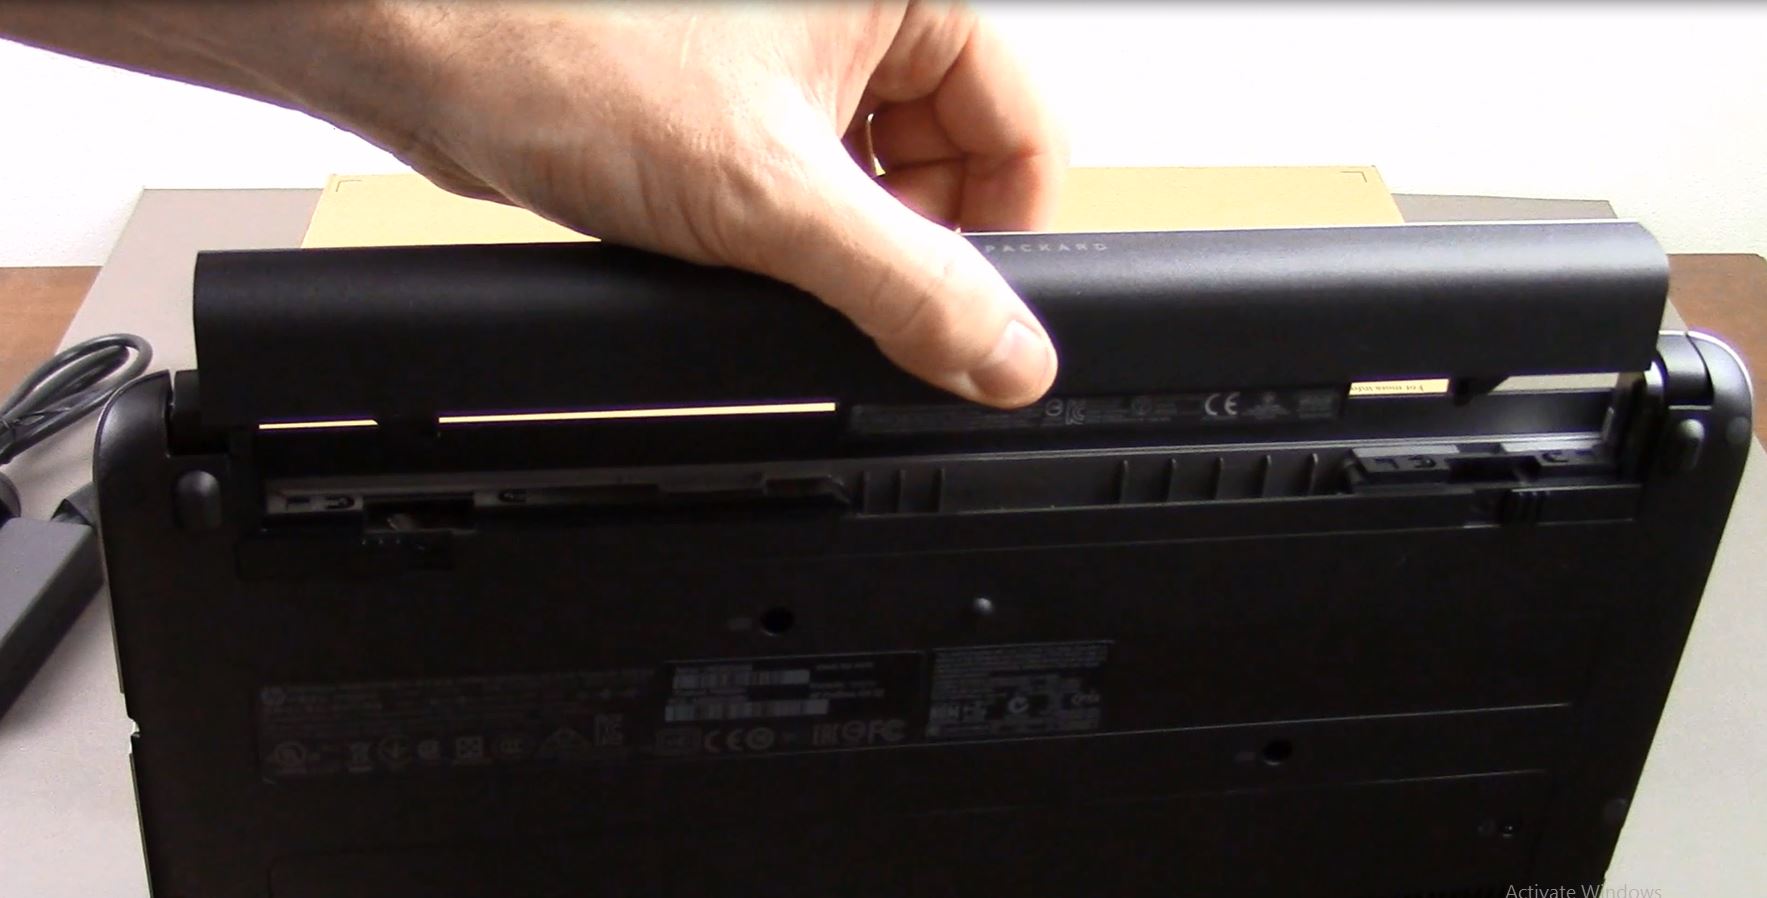 Transplant umbrella inflation Unboxing & First Look at the HP ProBook 430 G2 Laptop - 123myIT